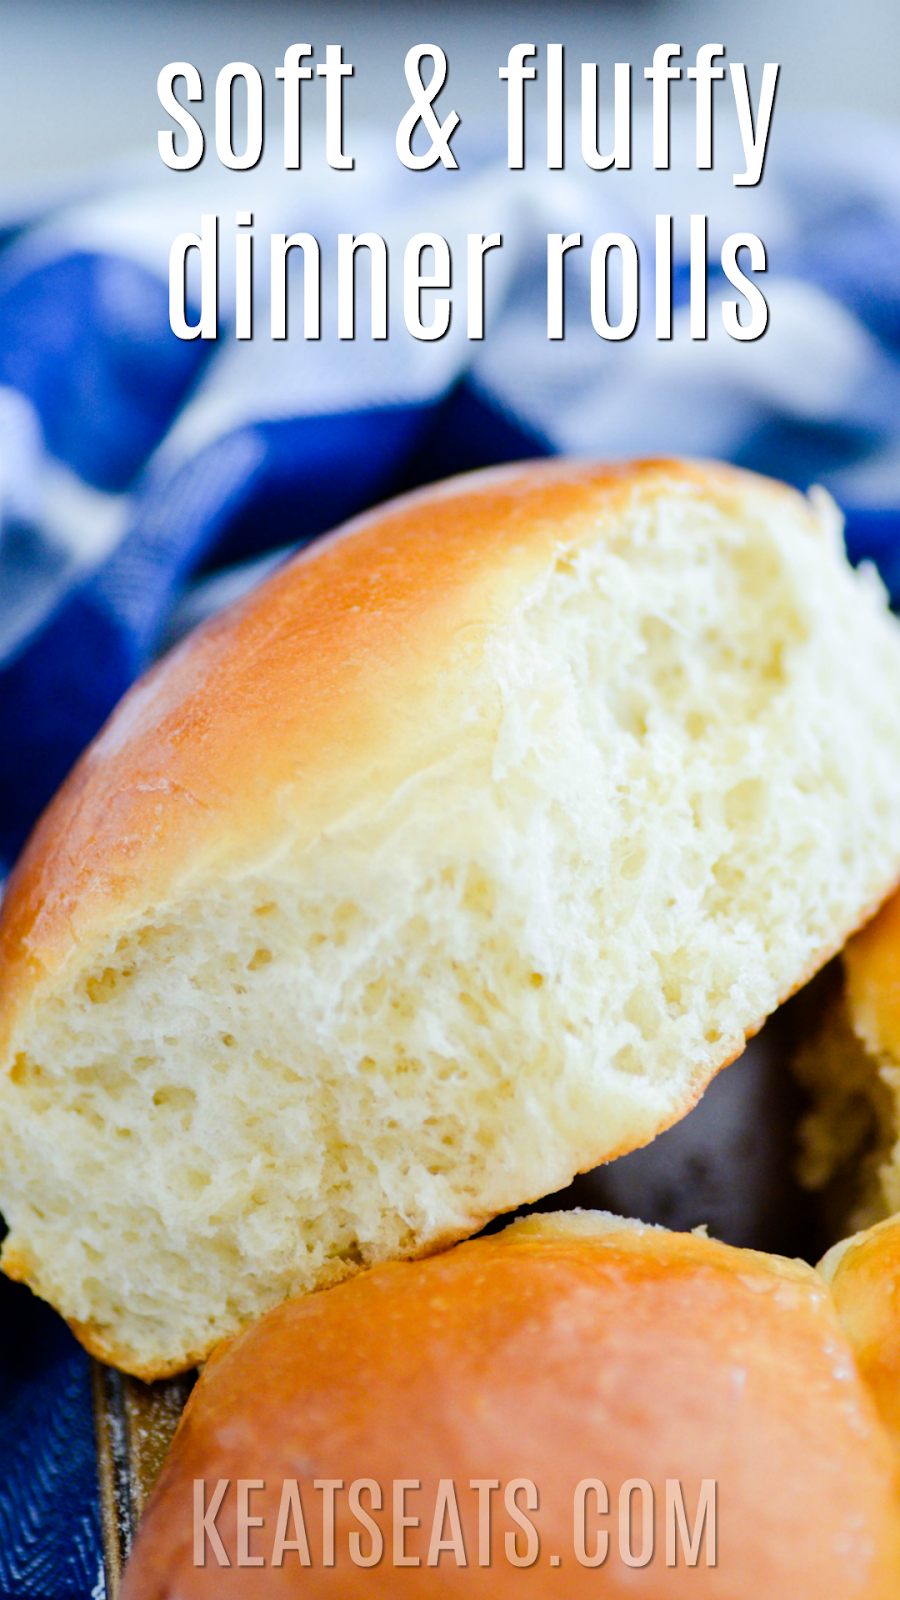 These dinner rolls were perfectly golden on top and pillow soft in the middle. Plus, this recipe makes a BIG batch, which I think is a must in a dinner roll recipe!